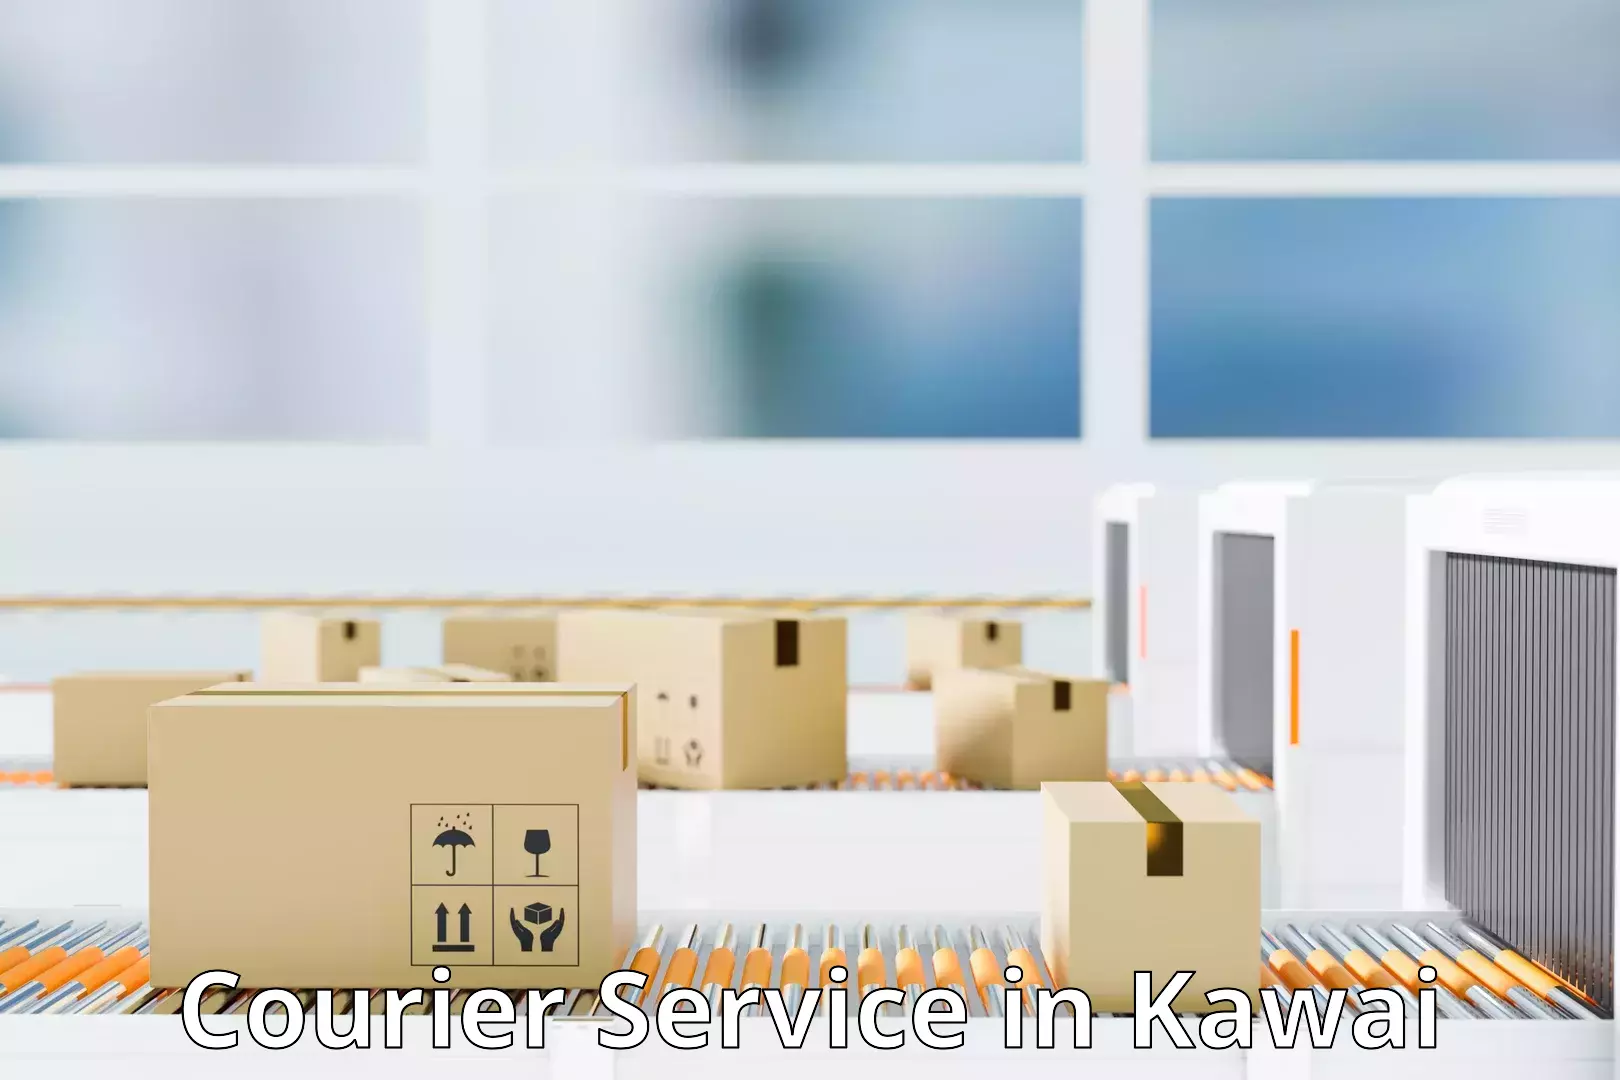 Modern delivery technologies in Kawai